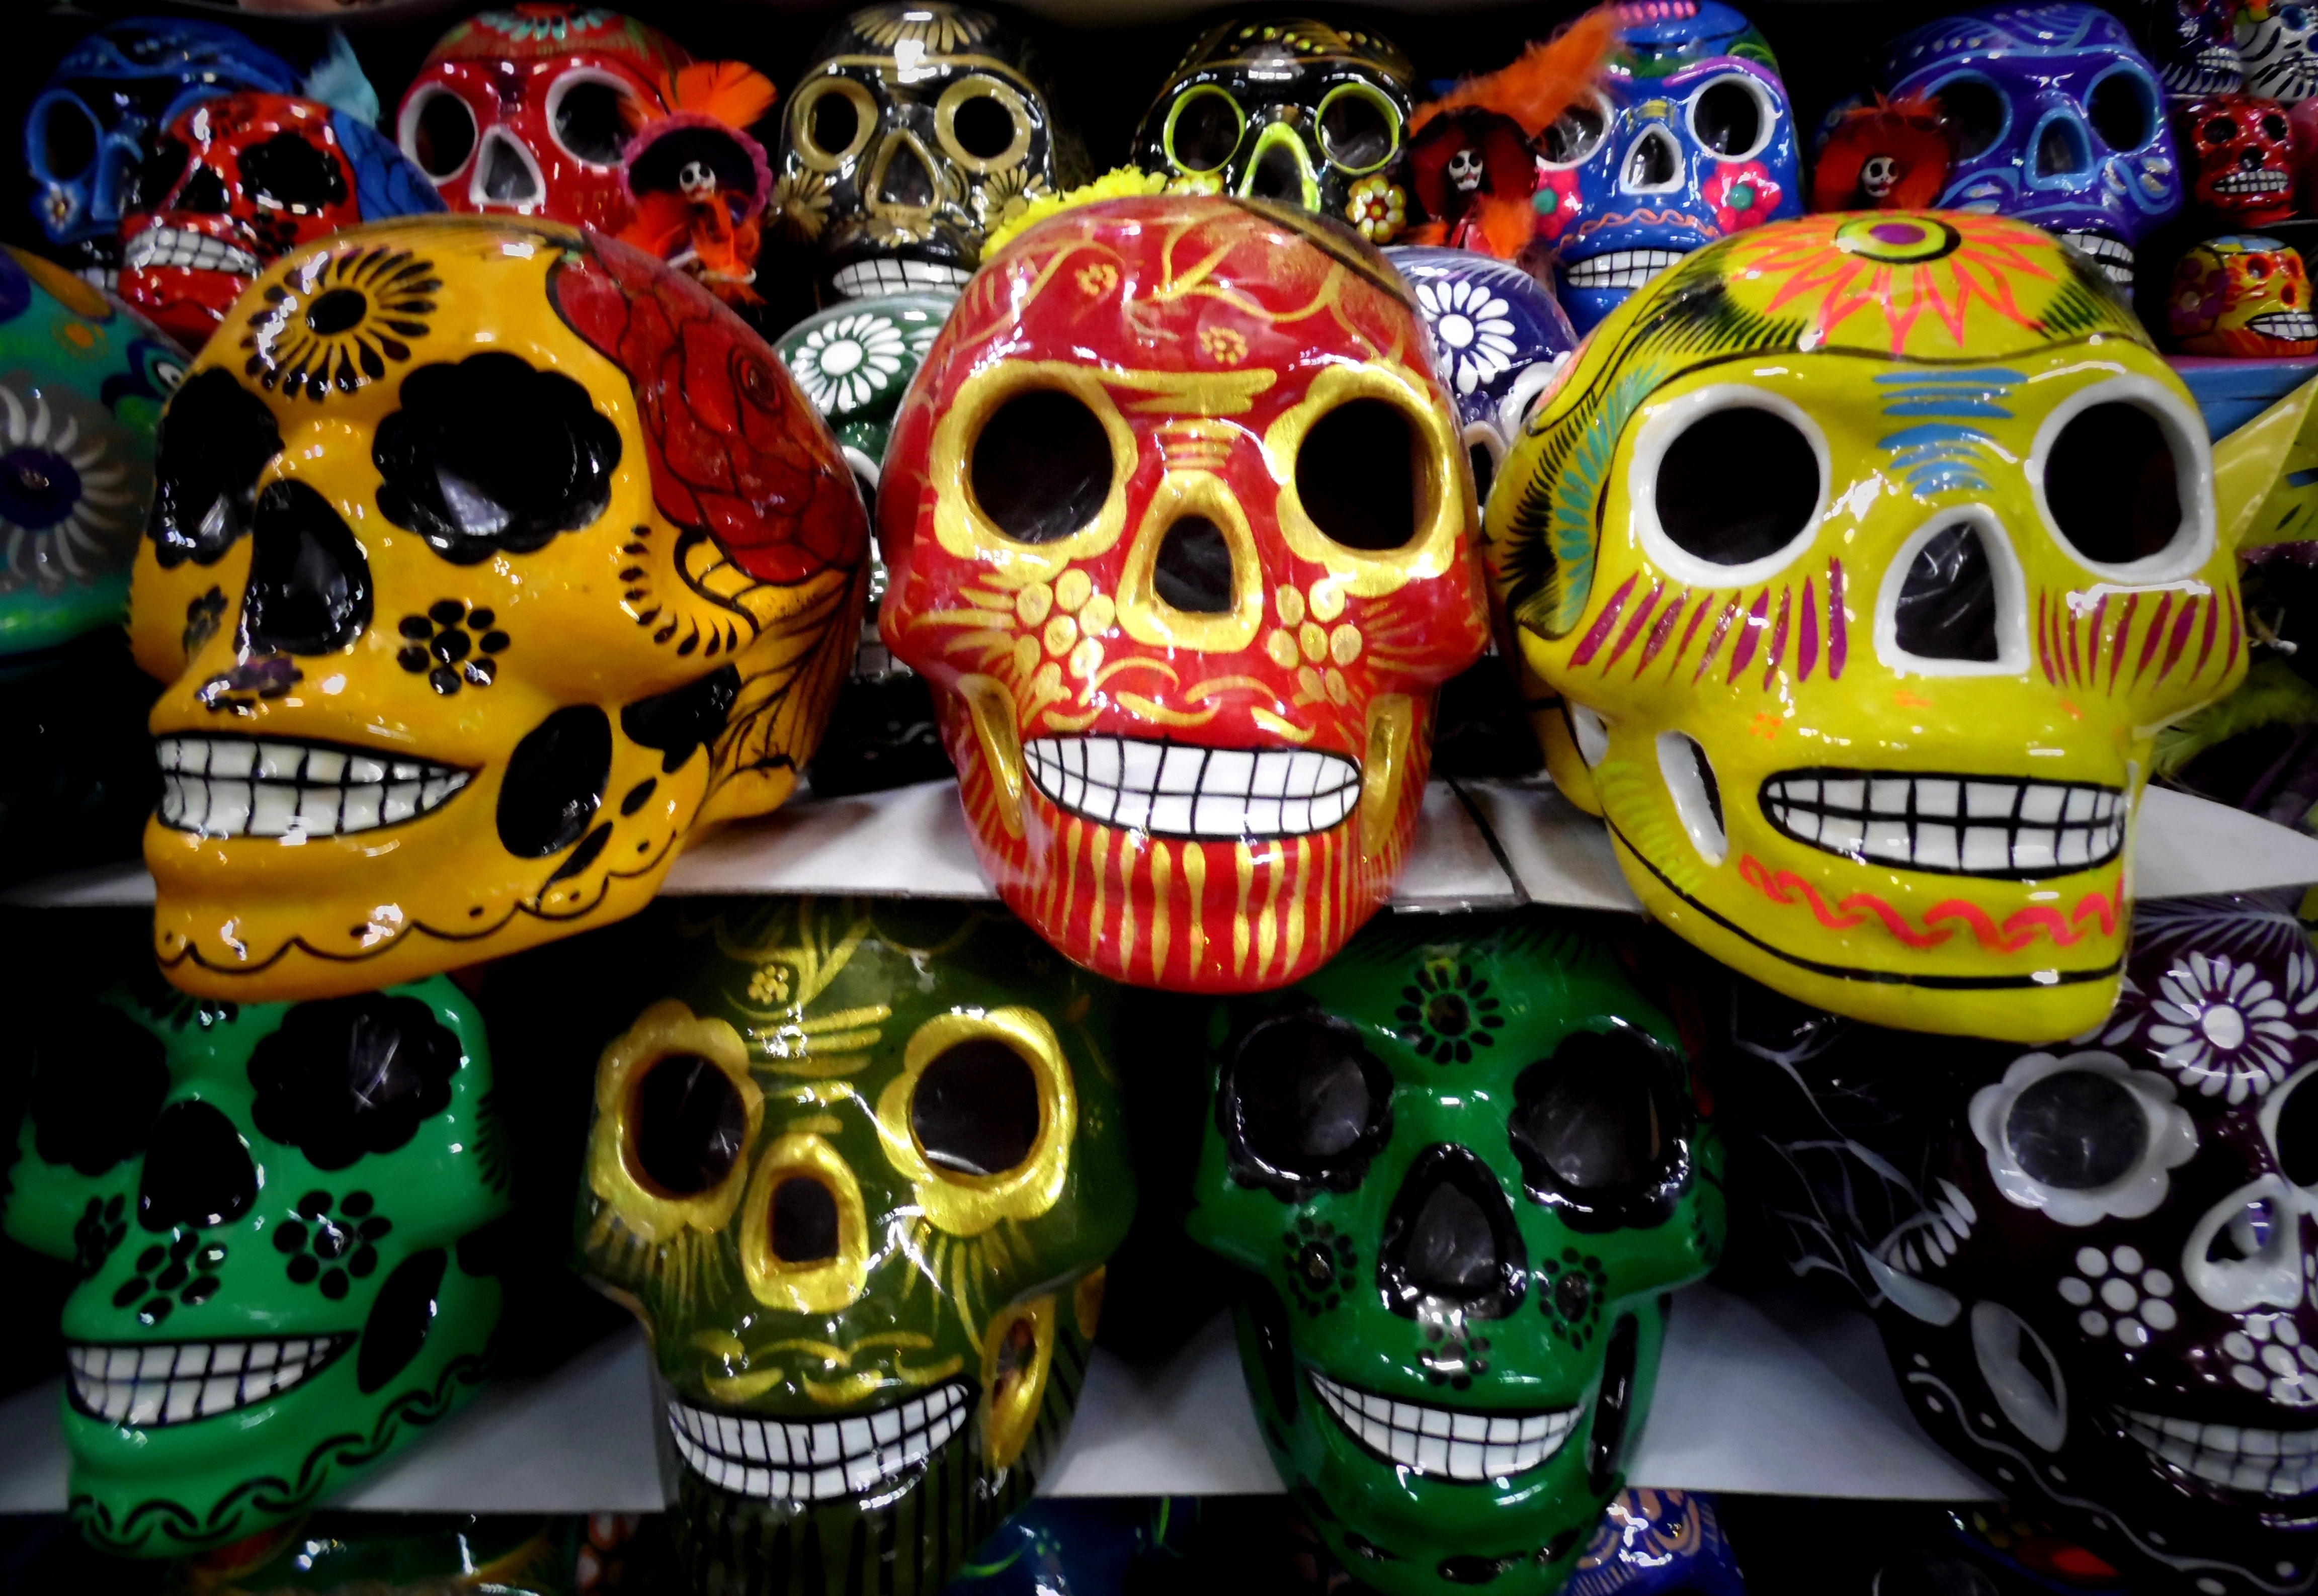 An In Depth Review of the Best Sugar Skull Shoes of 2018